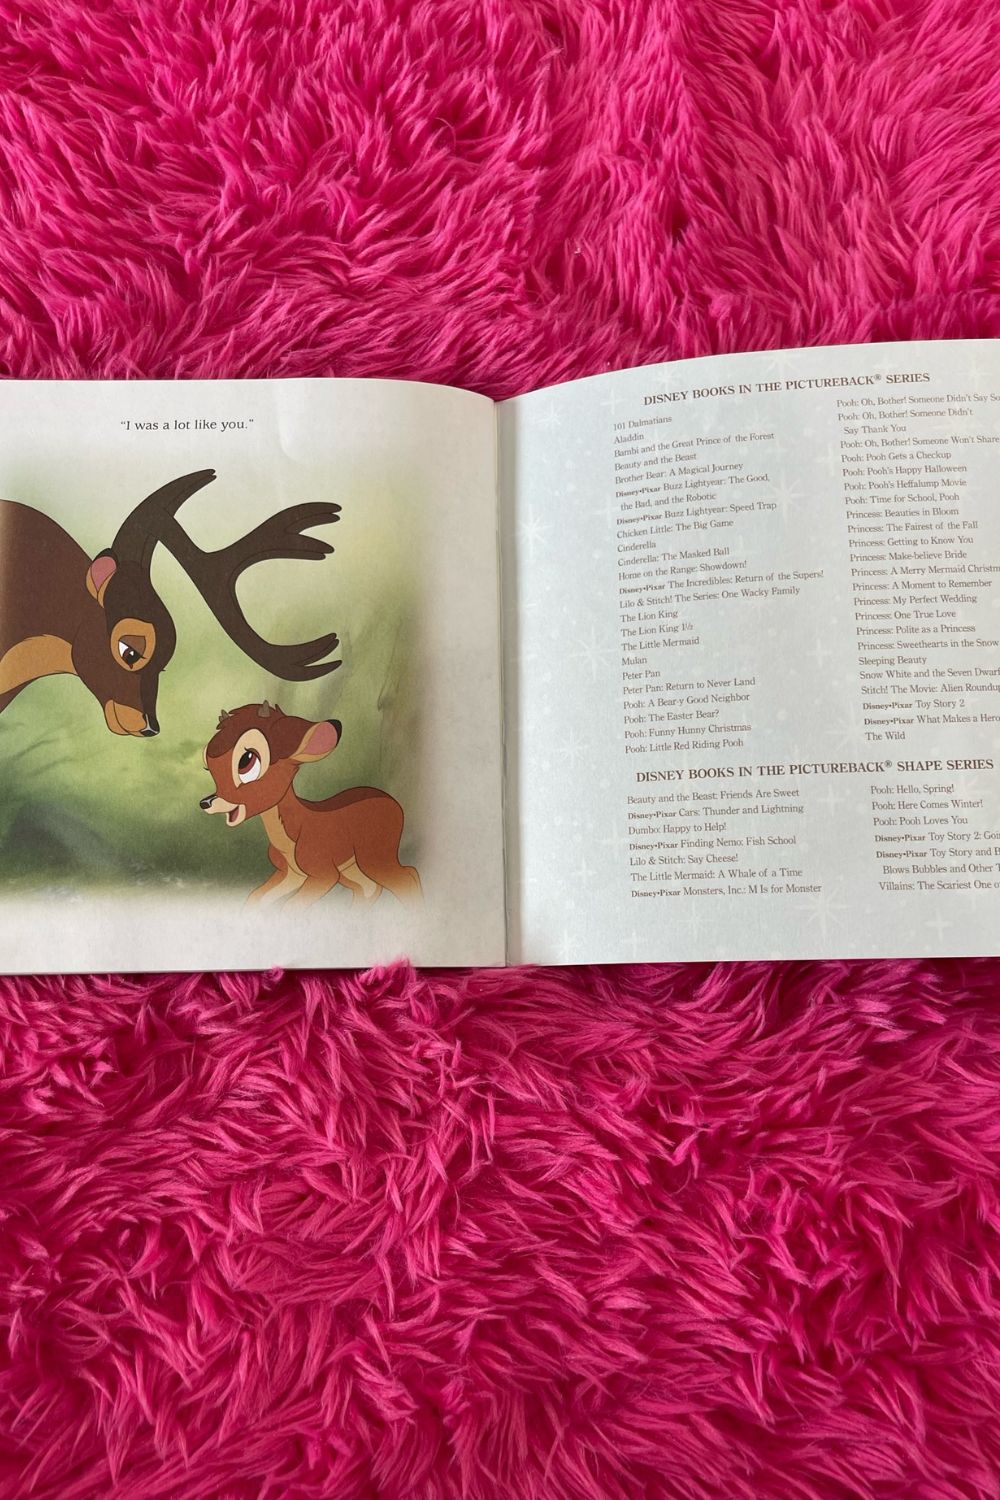 BAMBI BOOK - THE GREAT PRINCE OF THE FOREST*